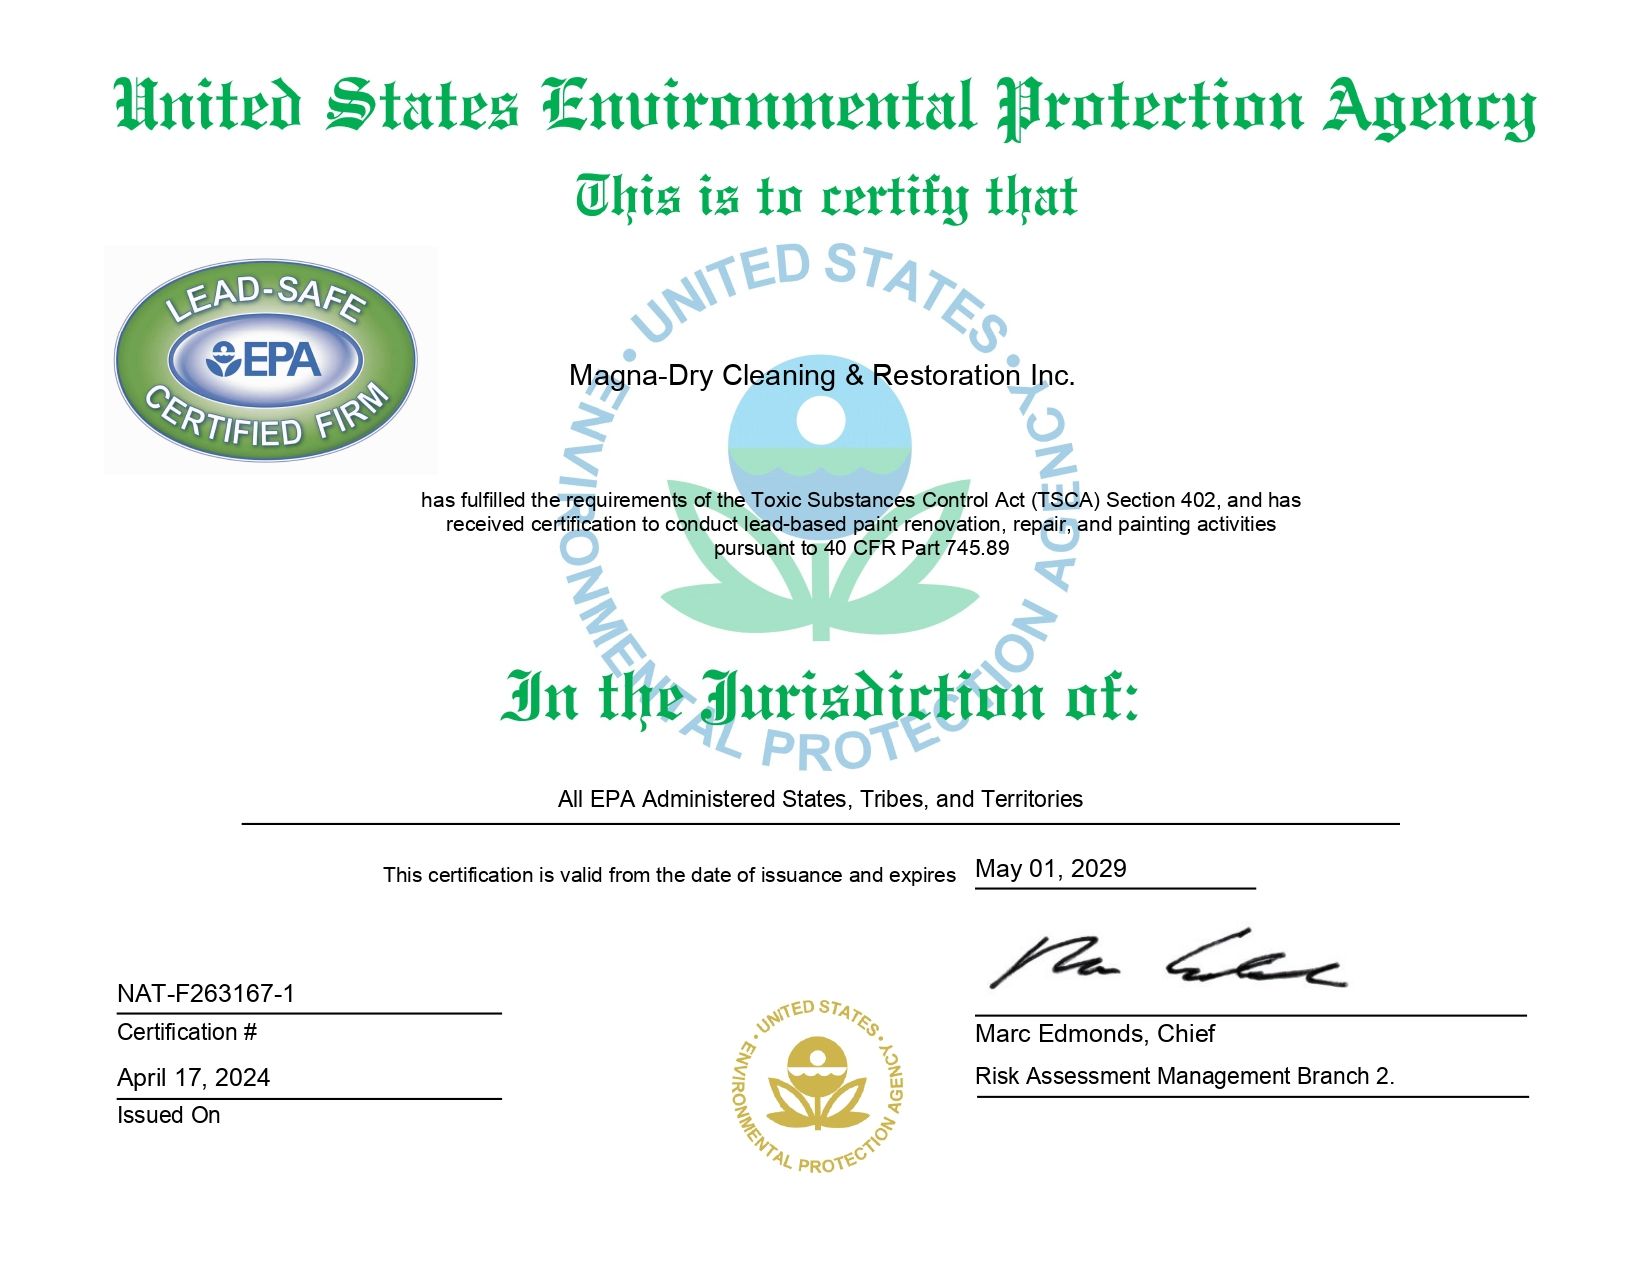 A certificate from the united states environmental protection agency